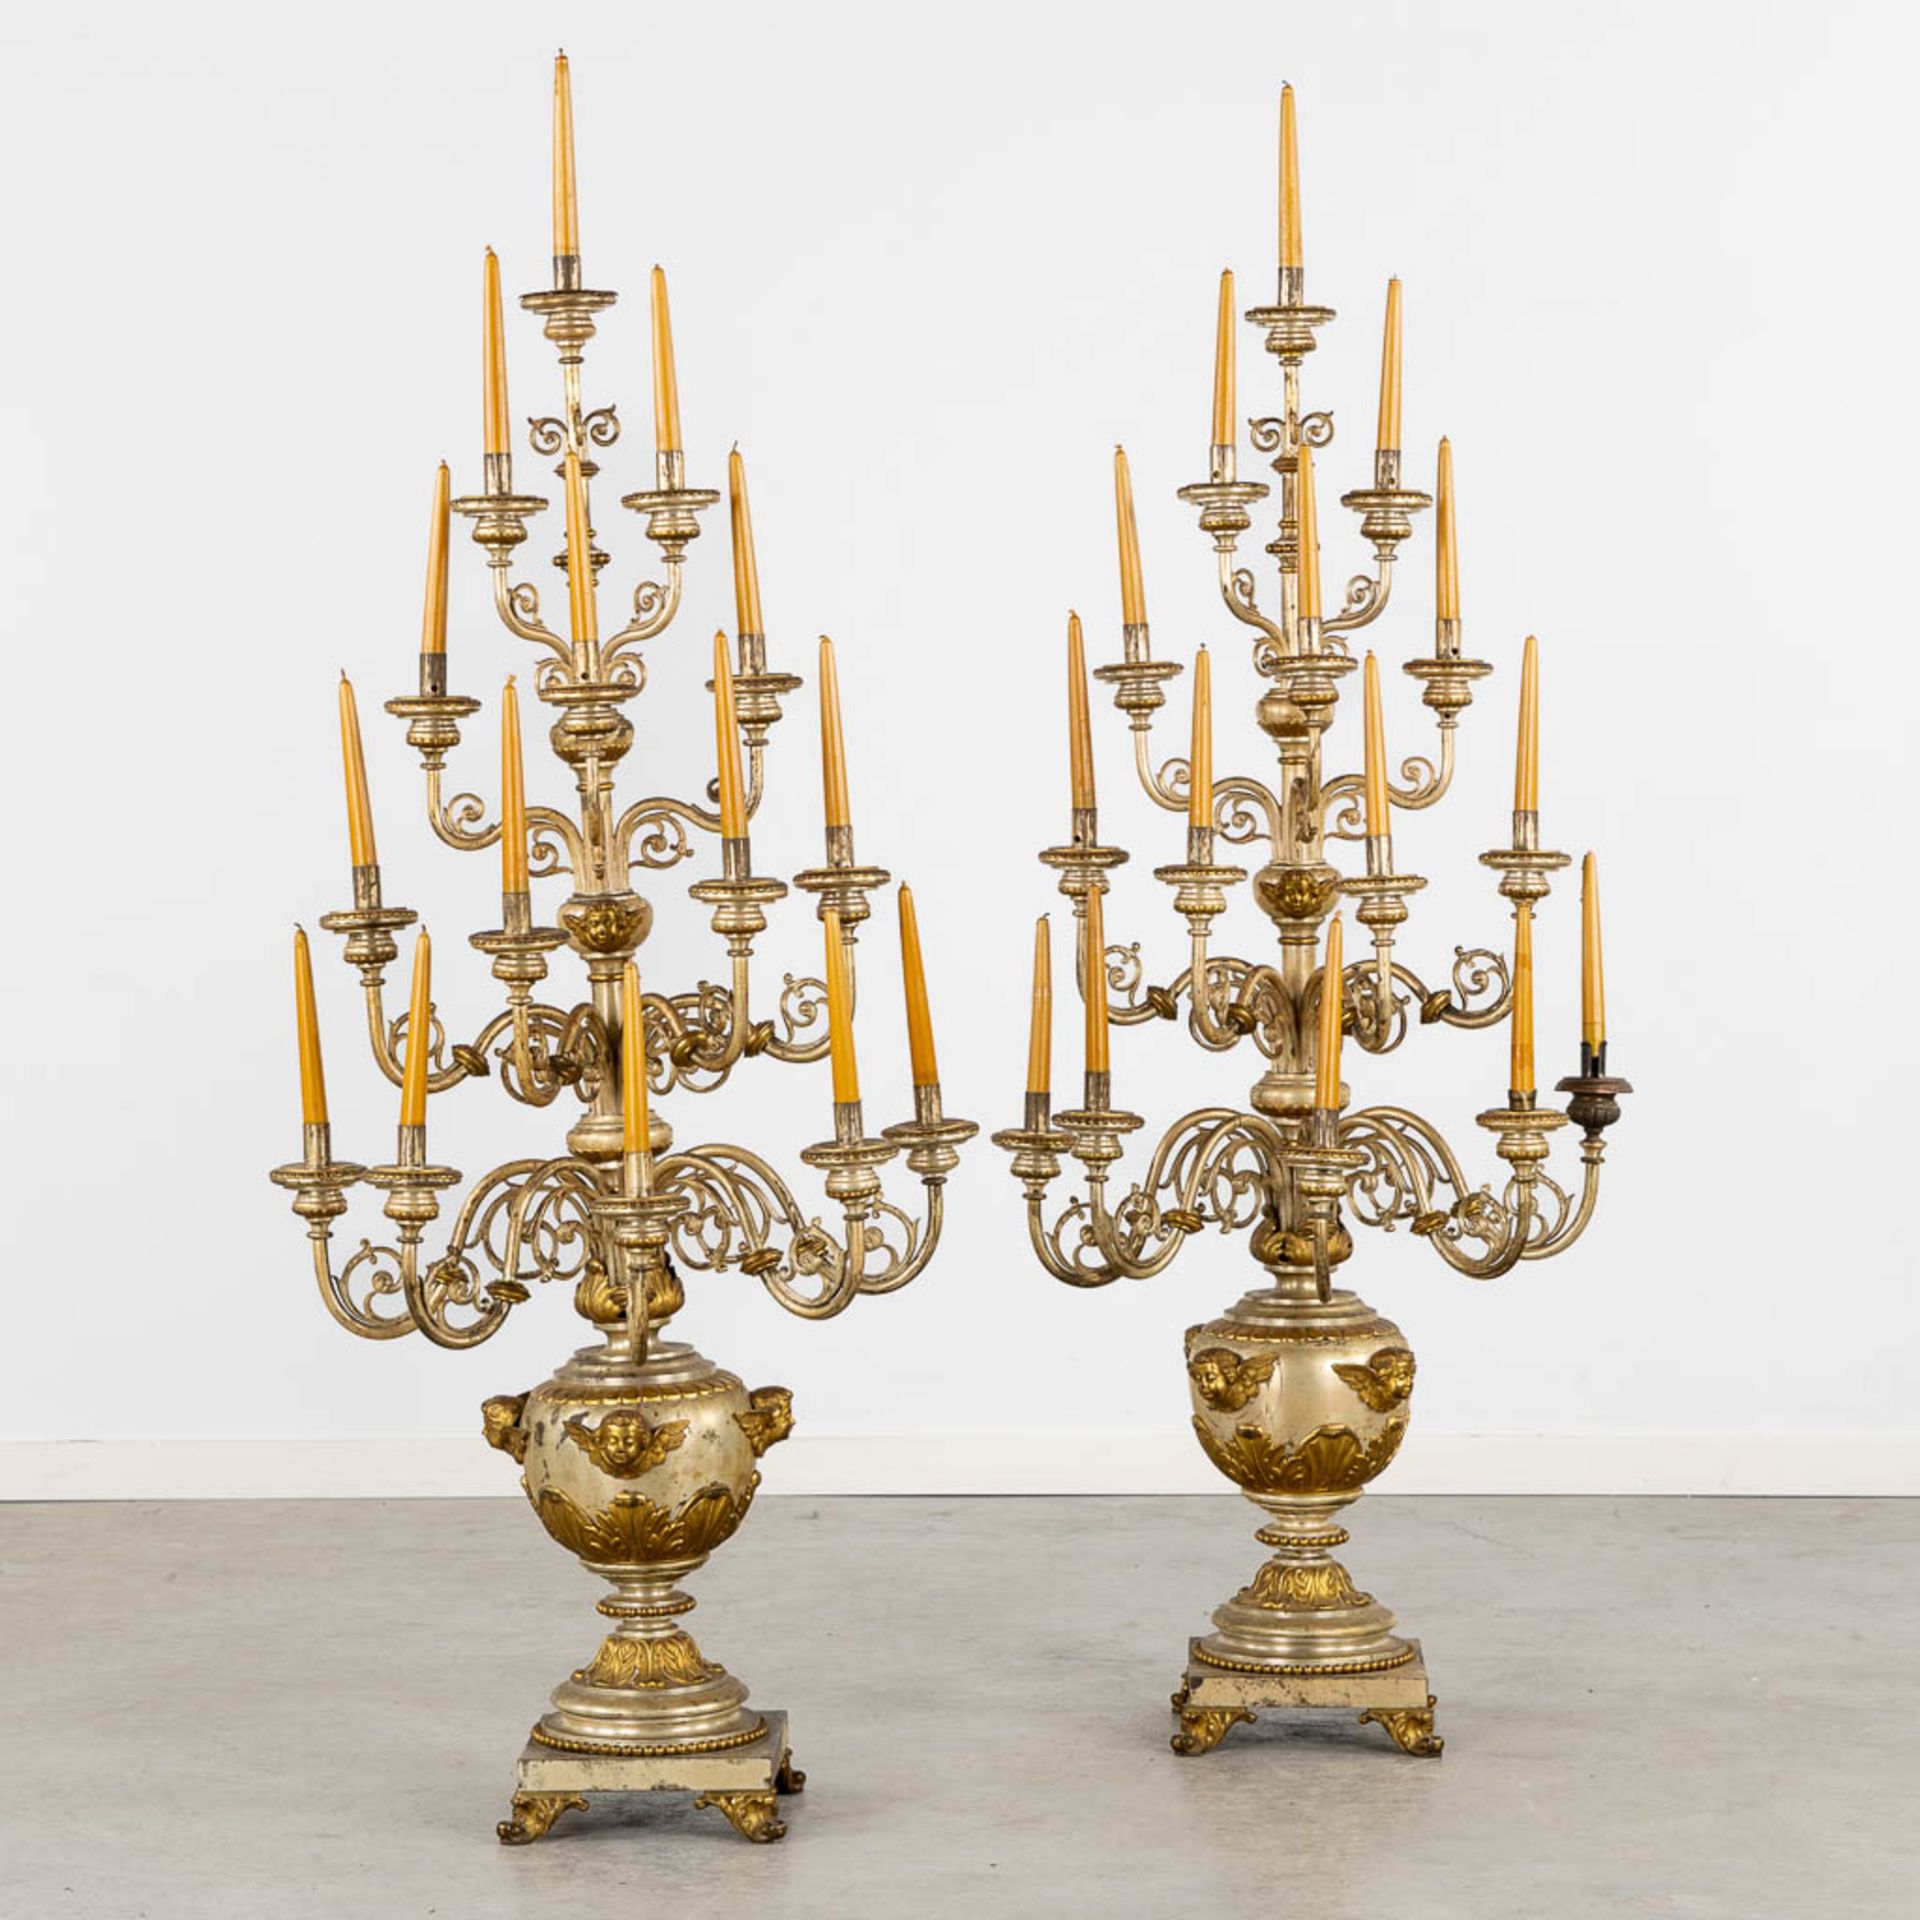 An impressive pair of candelabra, 15 candles, gold and silver-plated metal. (L:44 x W:60 x H:138 cm) - Bild 3 aus 12